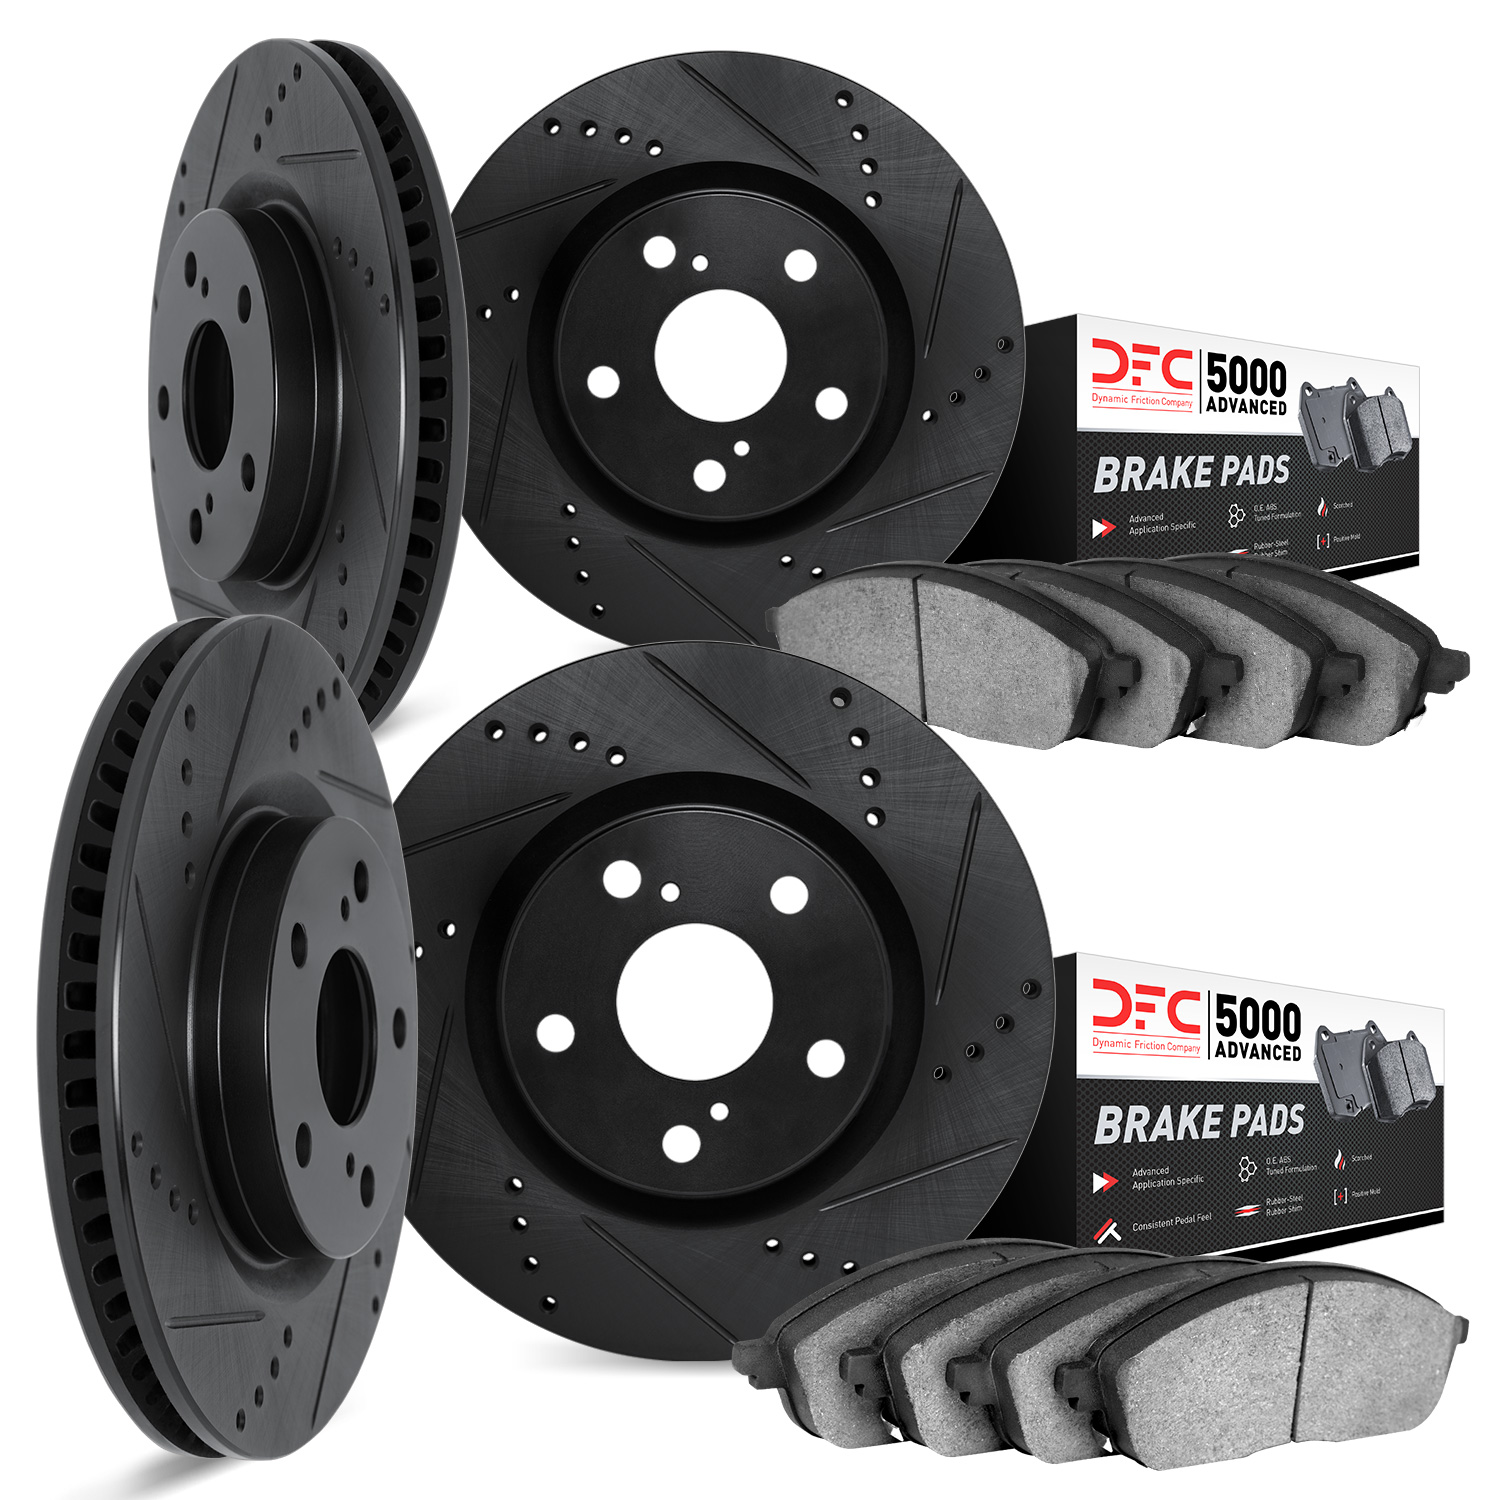 8504-31064 Drilled/Slotted Brake Rotors w/5000 Advanced Brake Pads Kit [Black], 2002-2006 BMW, Position: Front and Rear